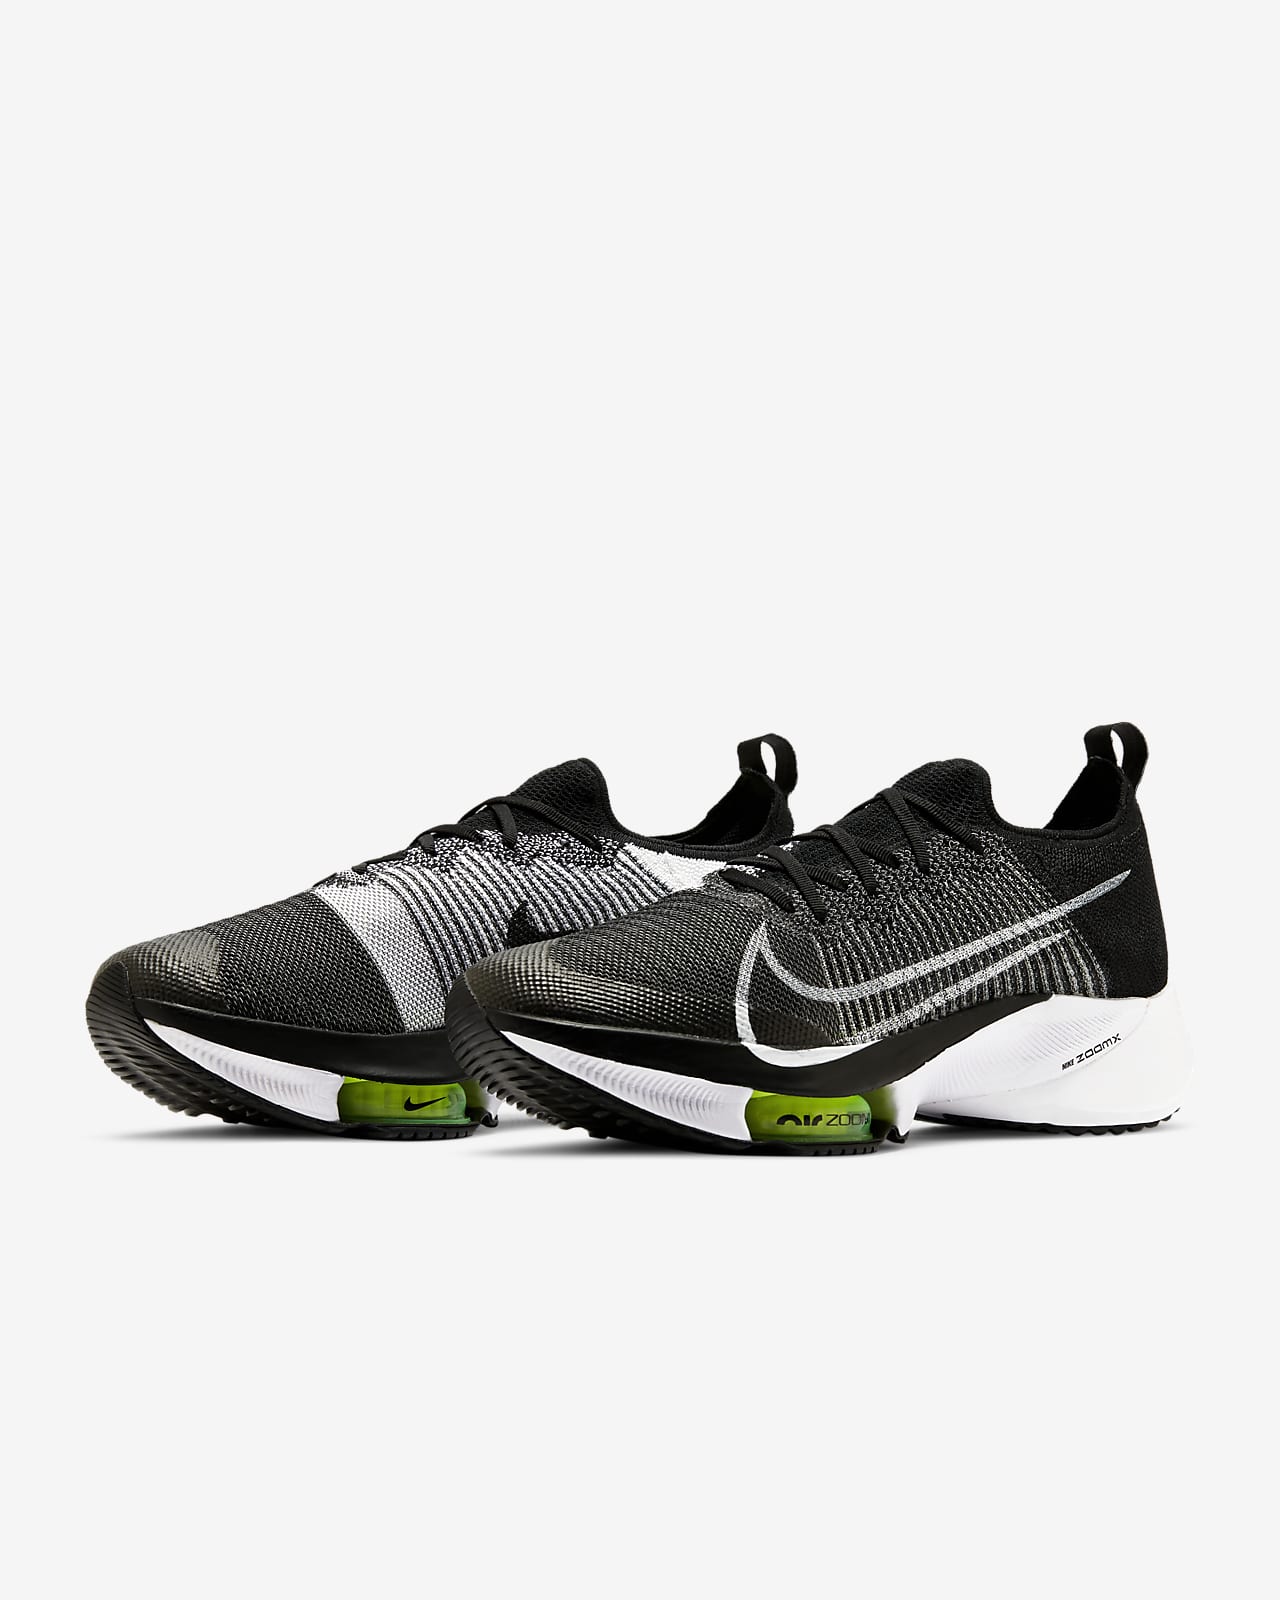 Nike Air Zoom Tempo NEXT% Men's Road Running Shoes